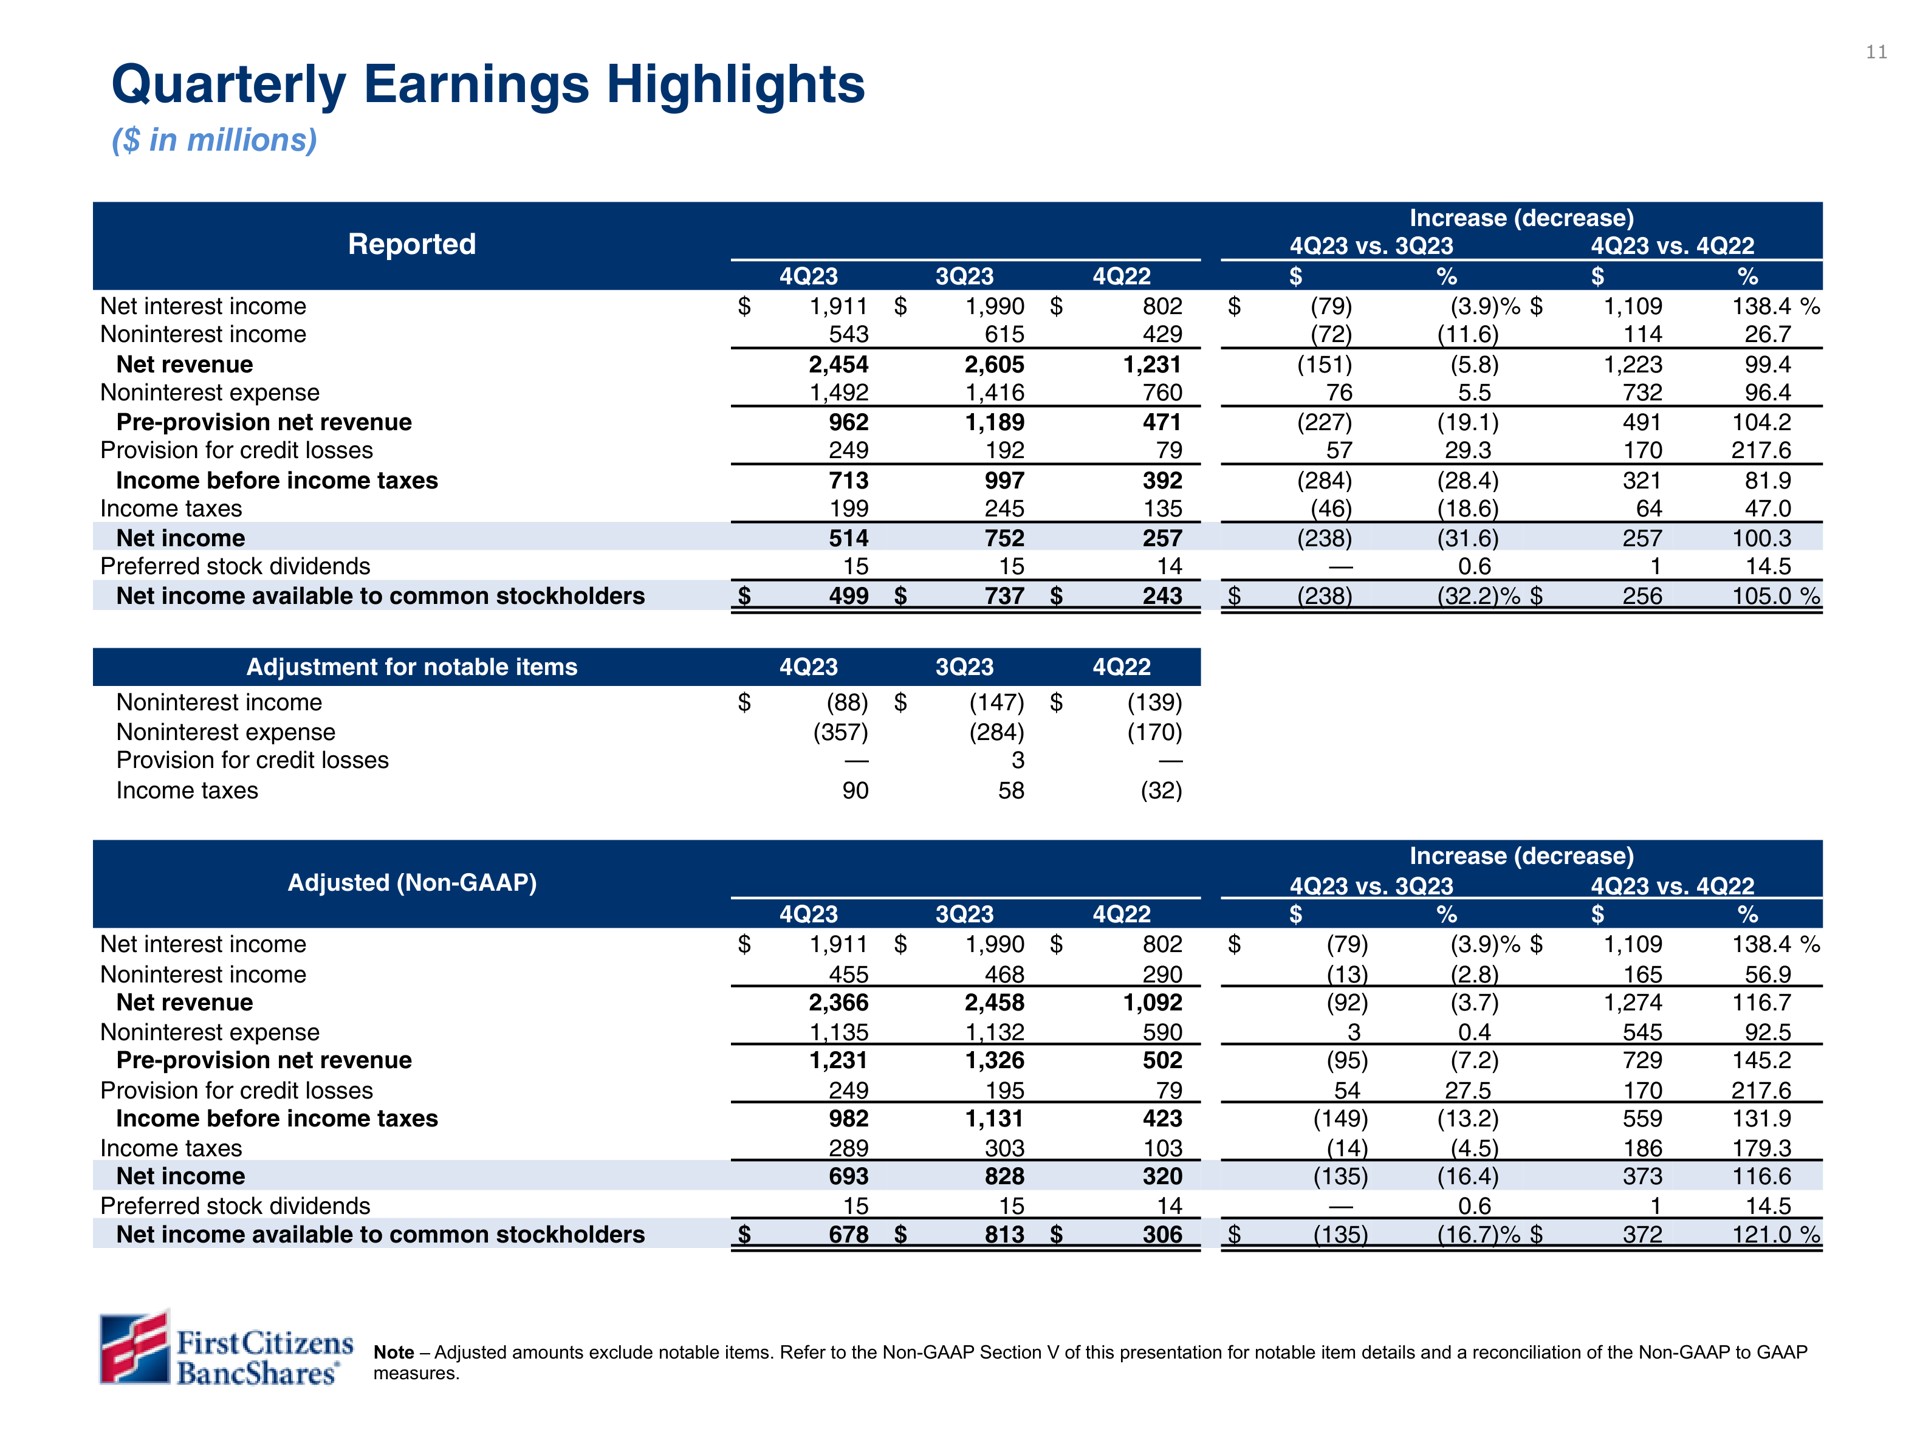 quarterly earnings highlights | First Citizens BancShares